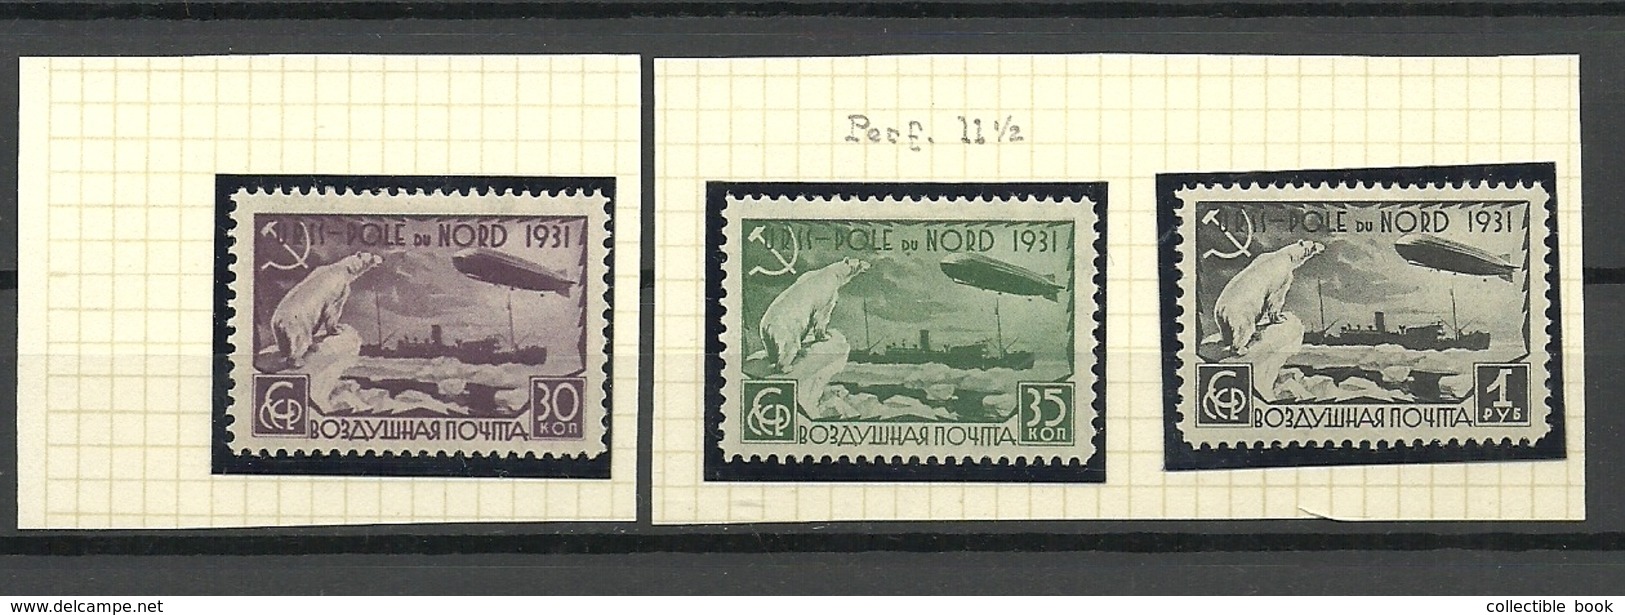 RUSSIA. URSS. USSR. 1931. Malygin, Zeppelin, Perf. 11 1/2 ! RARE OLD FORGERIES ! - Nuovi